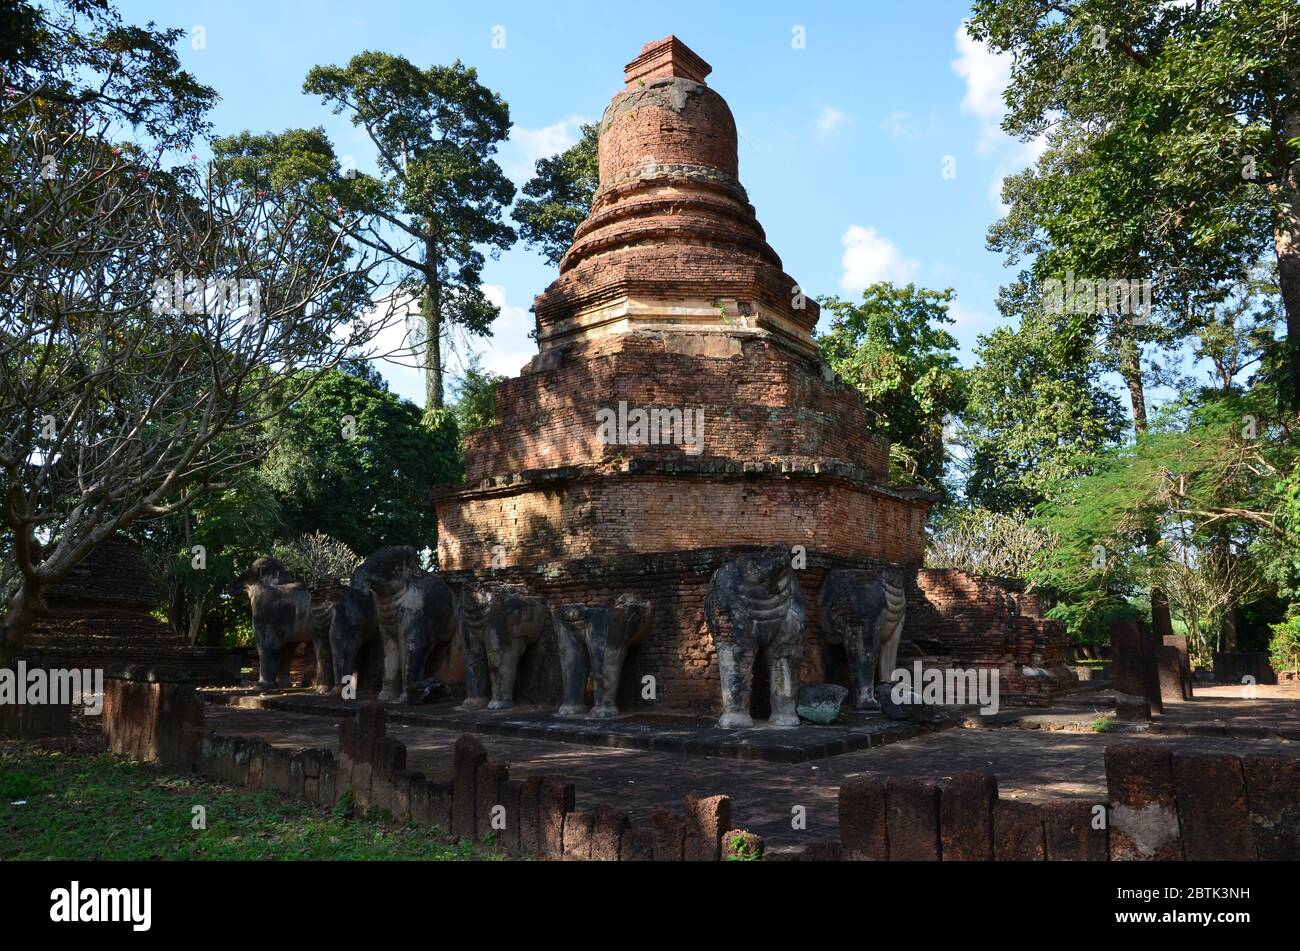 Chedi of Wat Chang in Kamphaeng Phet, formerly surrounded by elephants Stock Photo